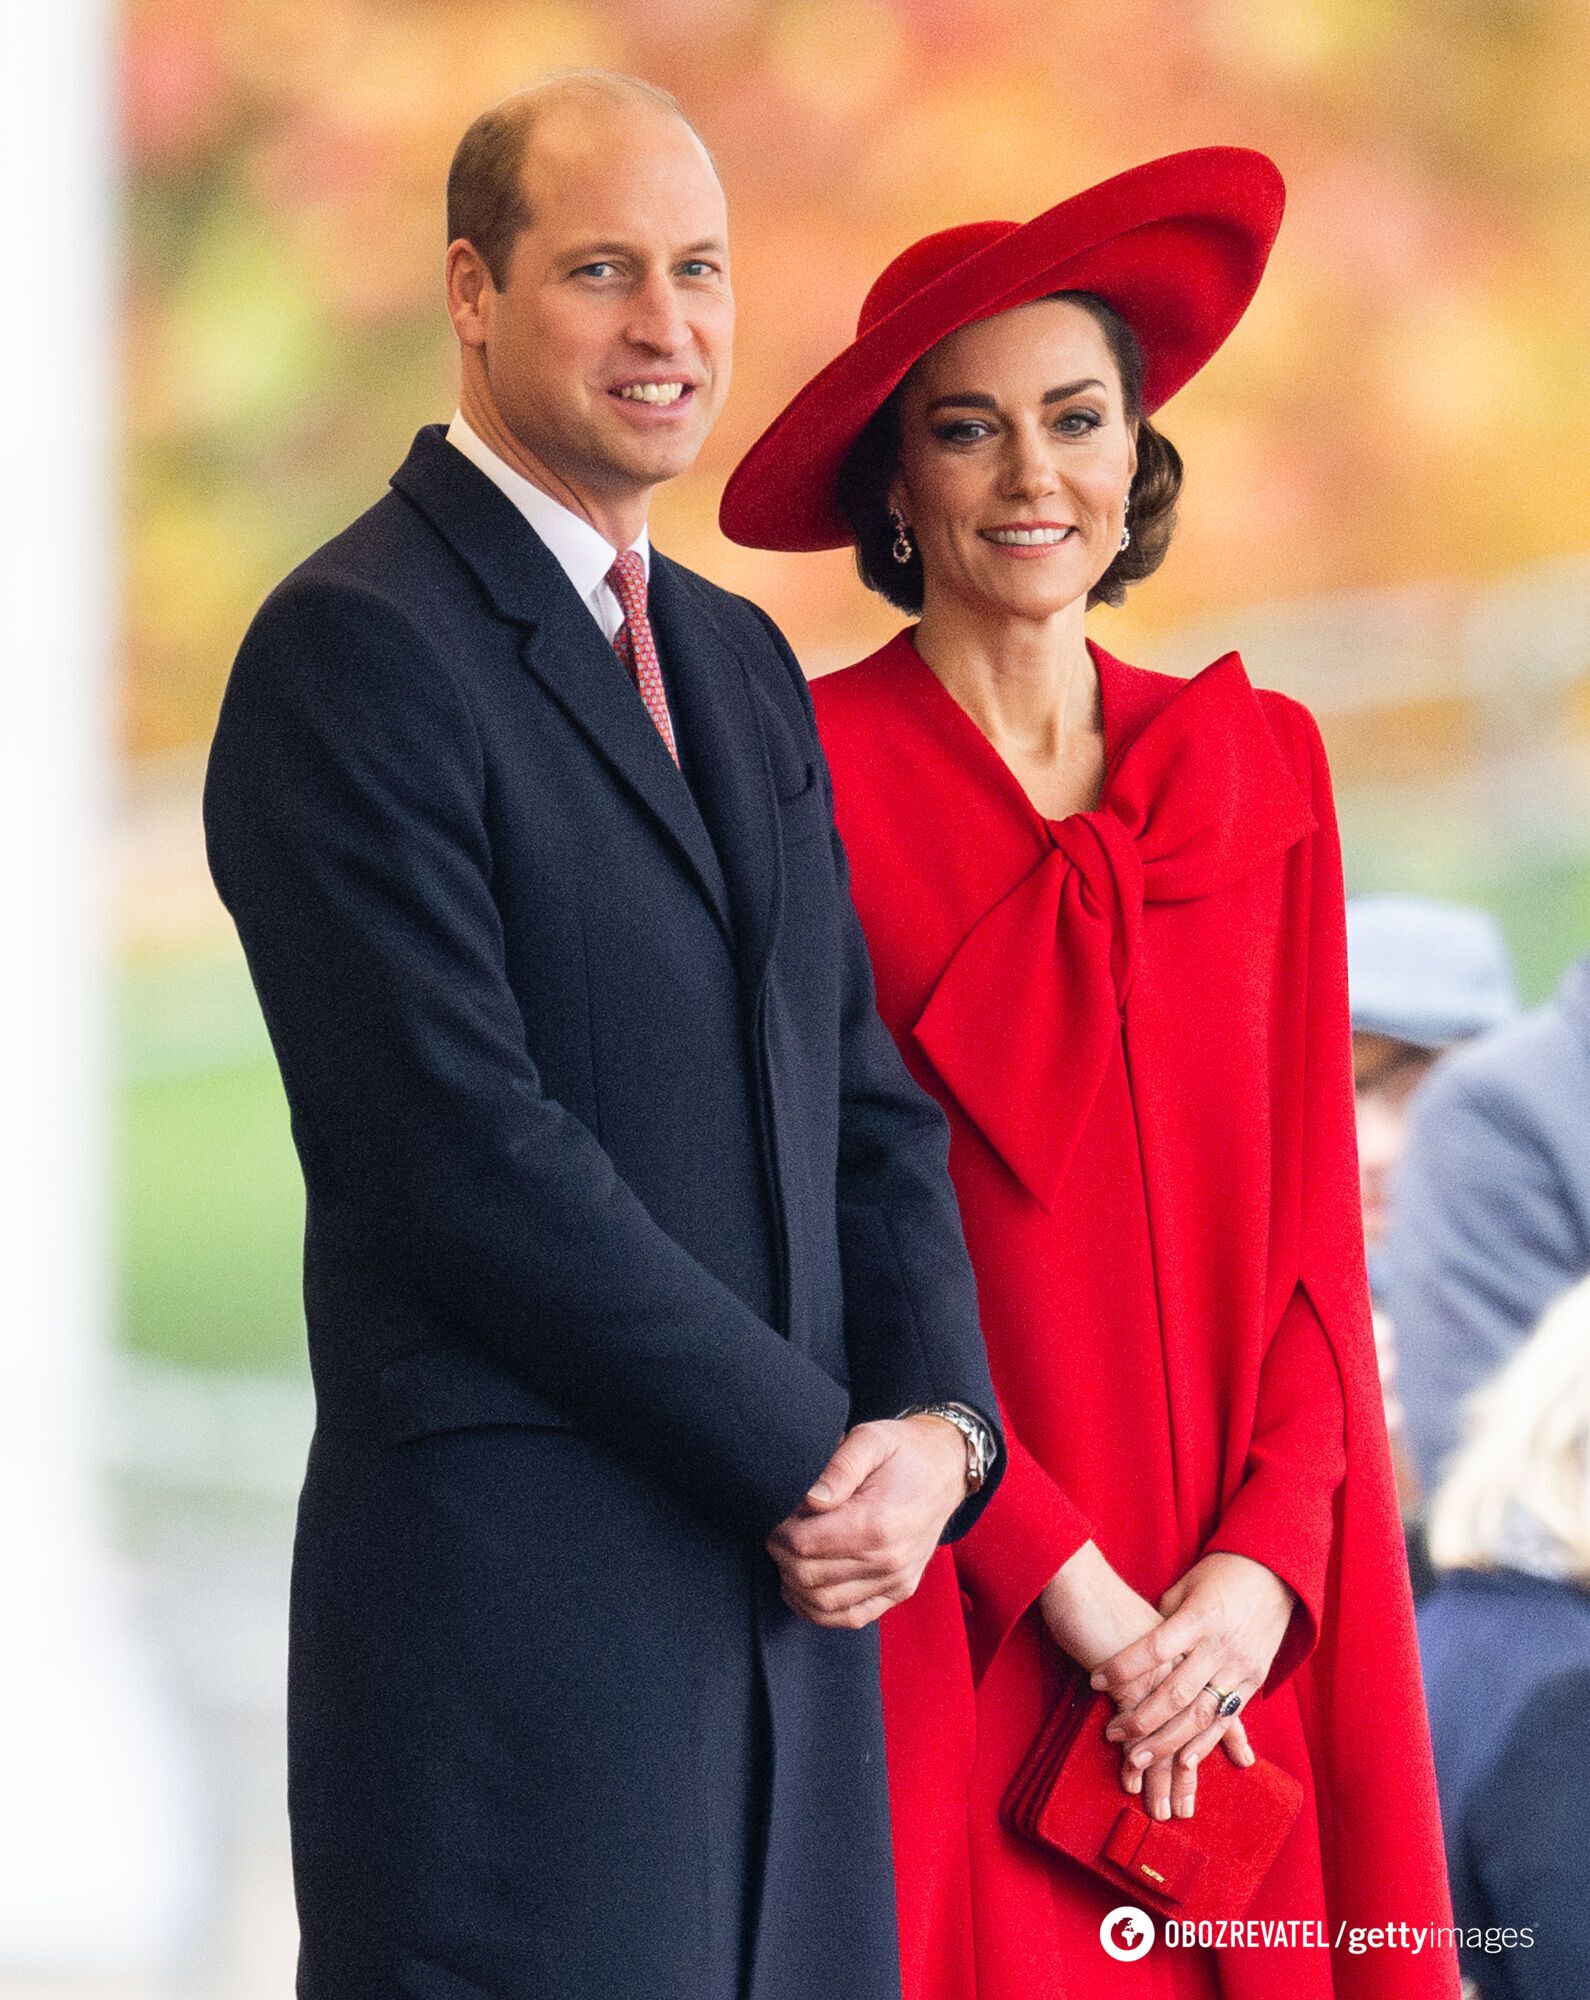 ''We are doing well''. Prince William spoke about the condition of Kate Middleton, who is battling cancer